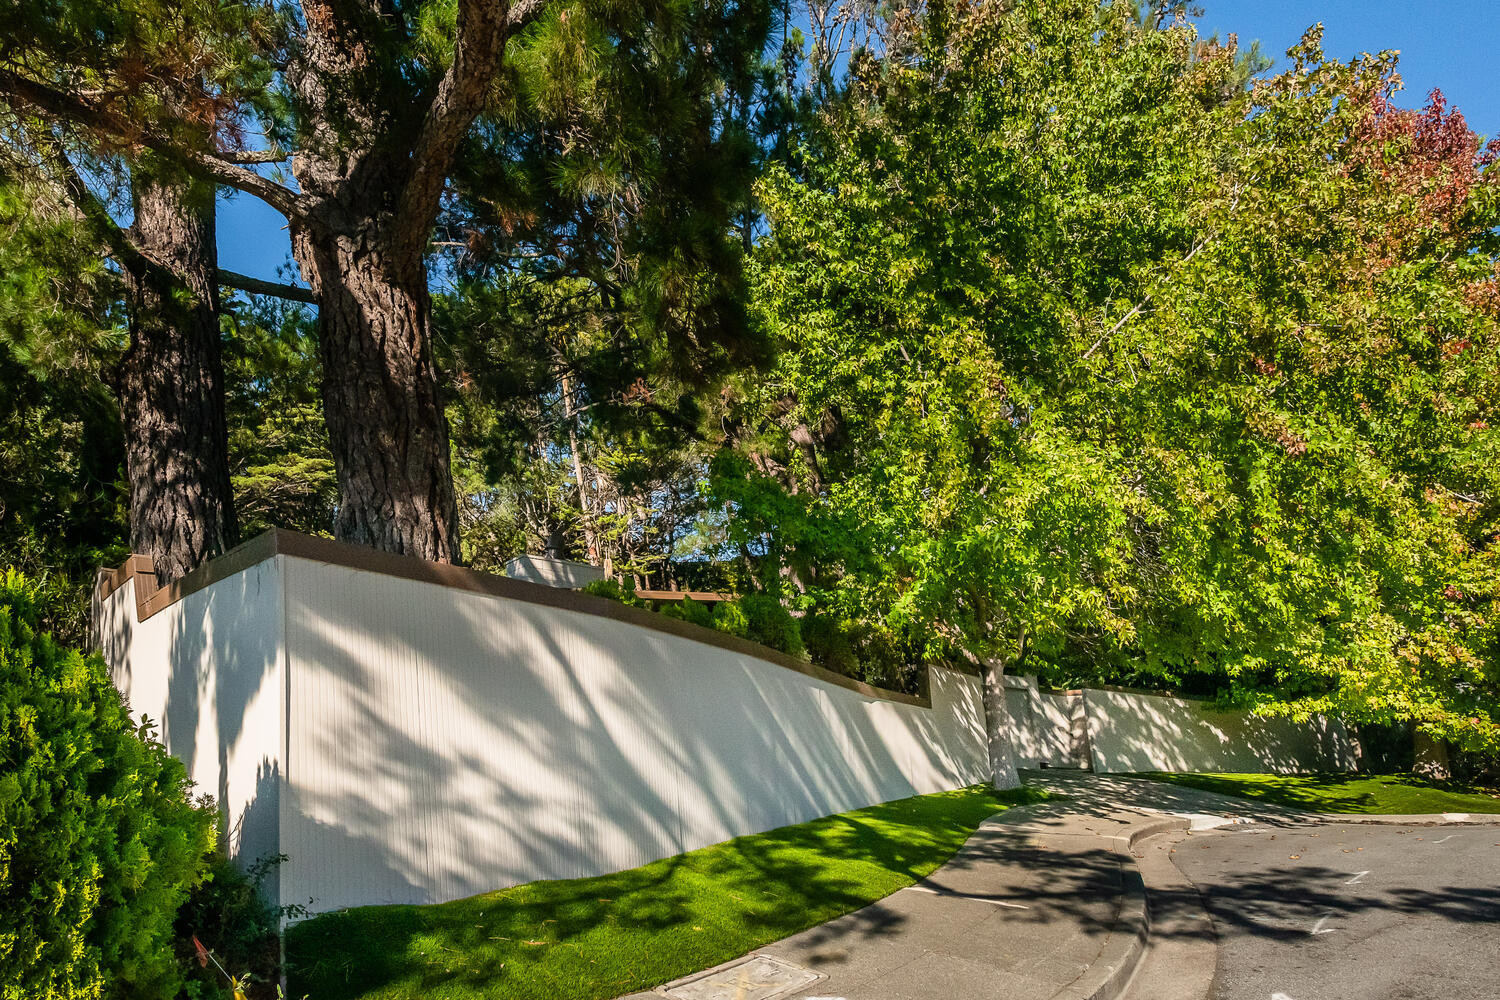 7 Mariposa Ct Wall Privacy fence in the Mills Estate area in Burlingame.